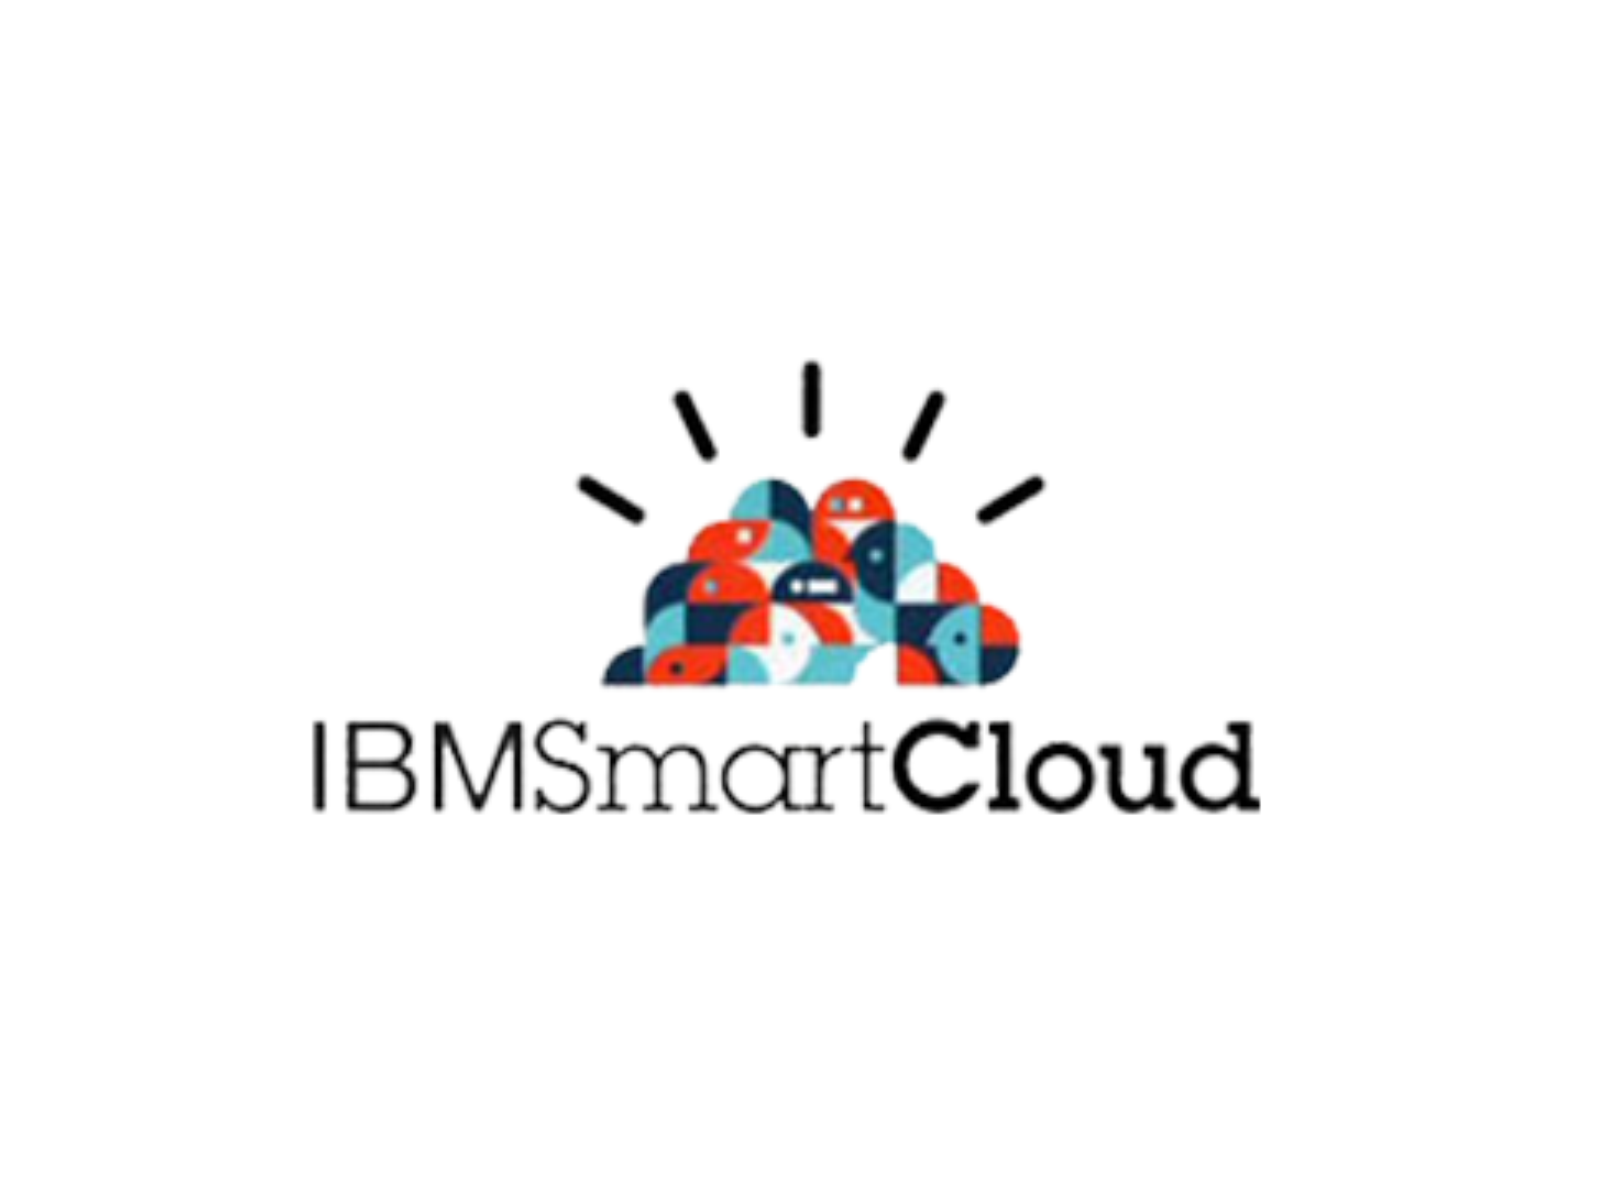 Communication & Collaboration as a Service by IBM Smart Cloud